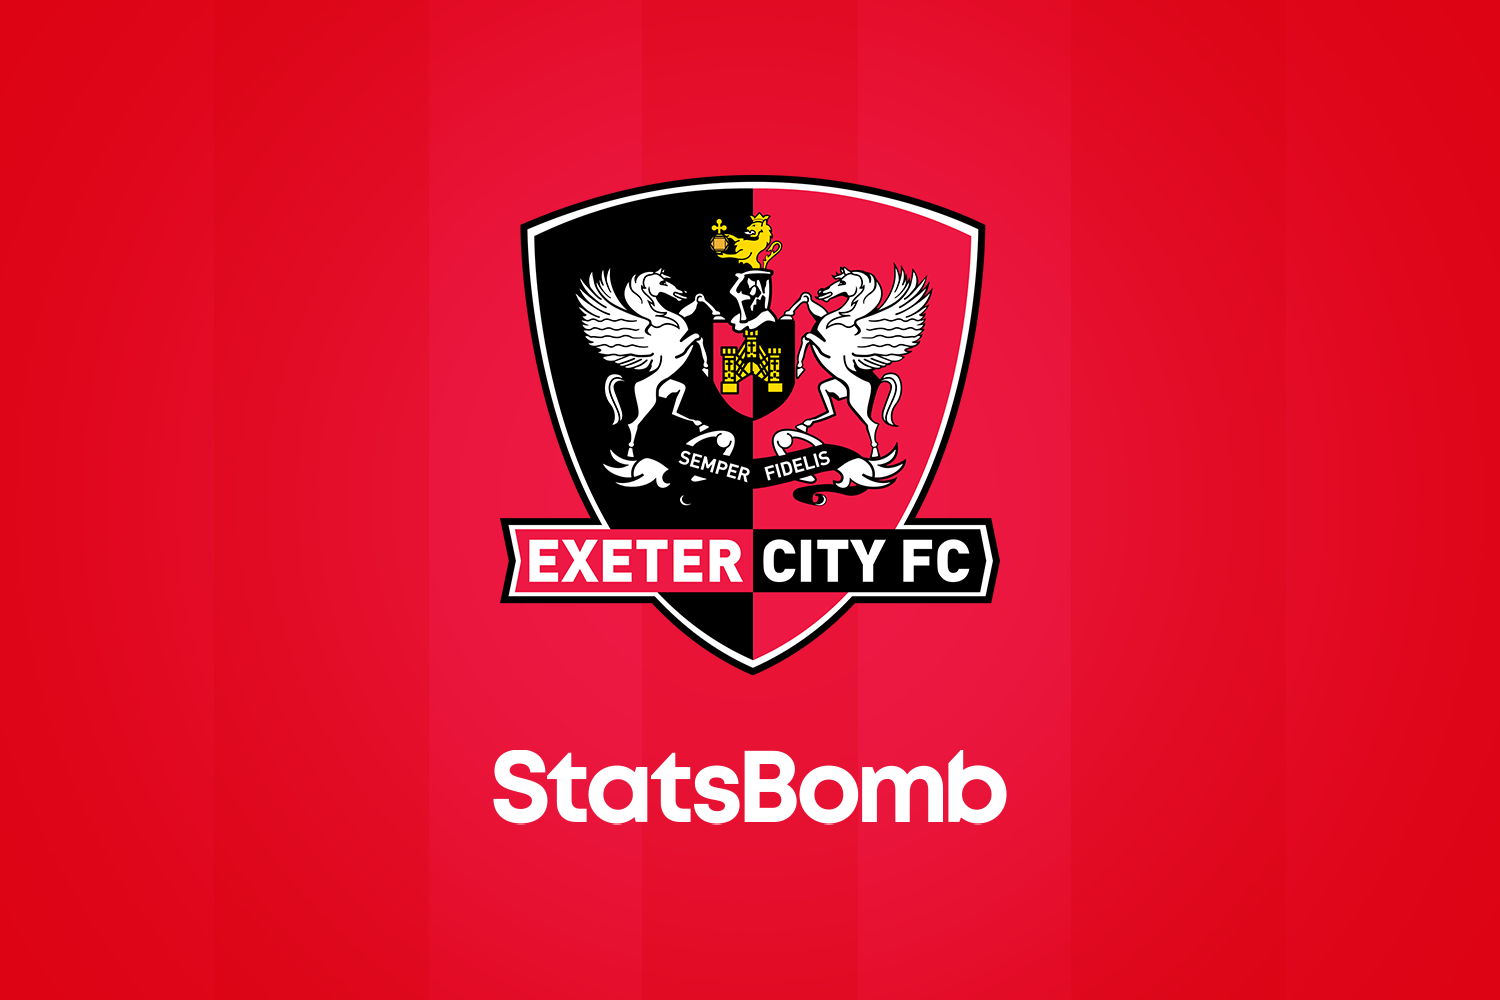 StatsBomb Continue To Grow Presence In League One With Exeter City Agreement